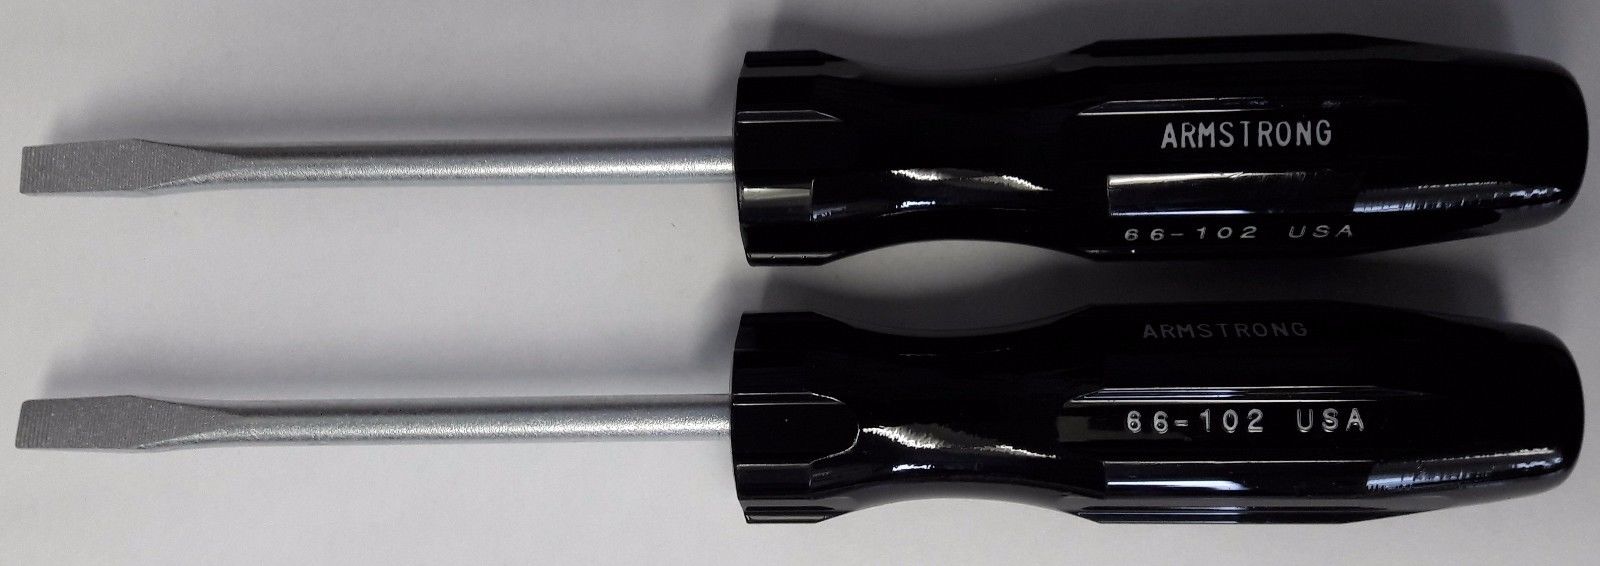 Armstrong 66-102A 1/4" x 4" Slotted  Screwdriver Round Shank USA 2PCS